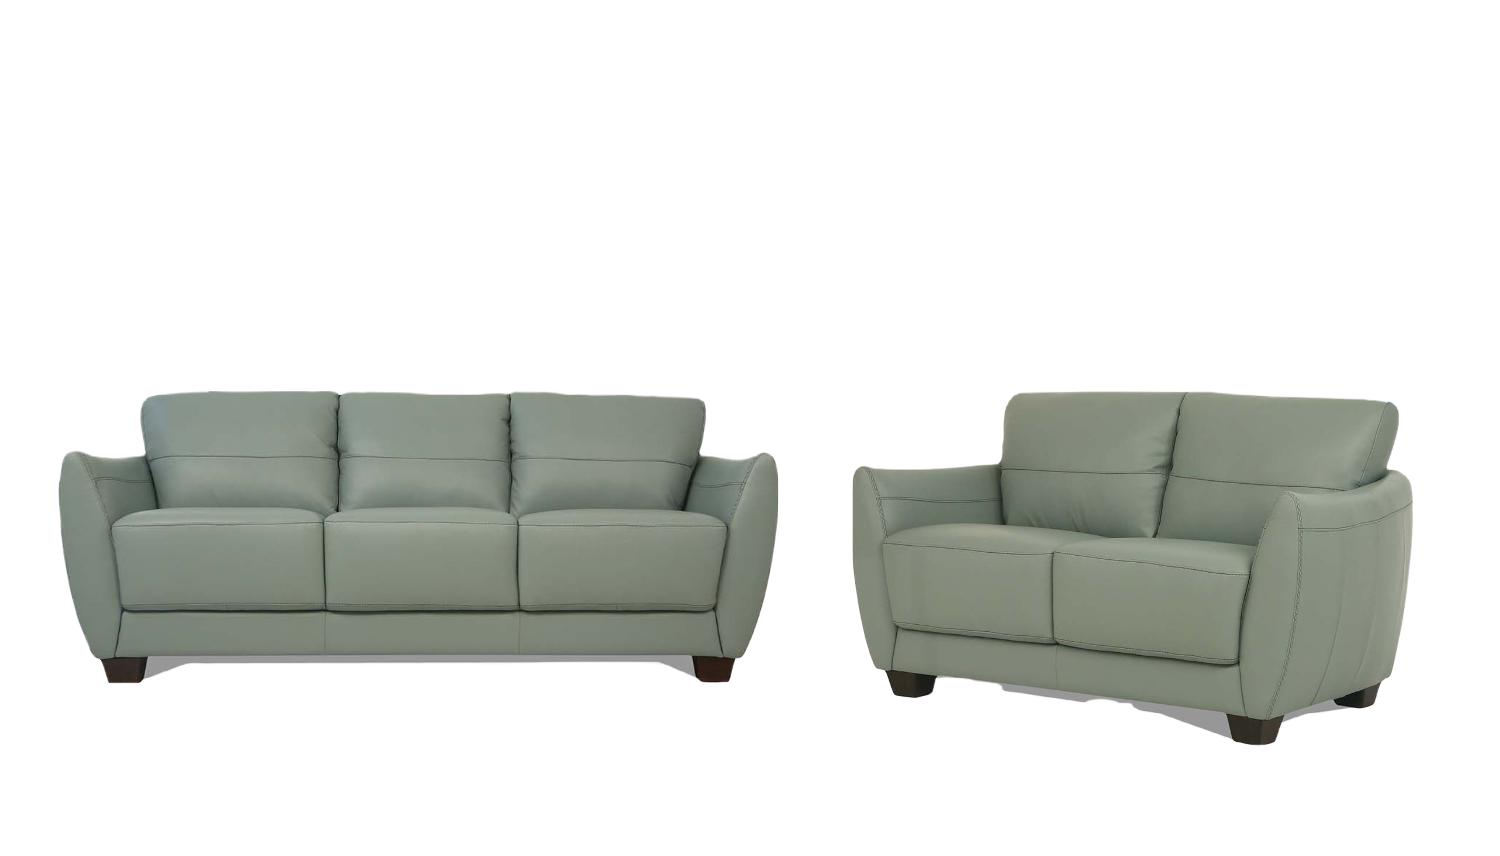 Modern, Transitional Sofa and Loveseat Set Valeria 54950-2pcs in Spring green Leather